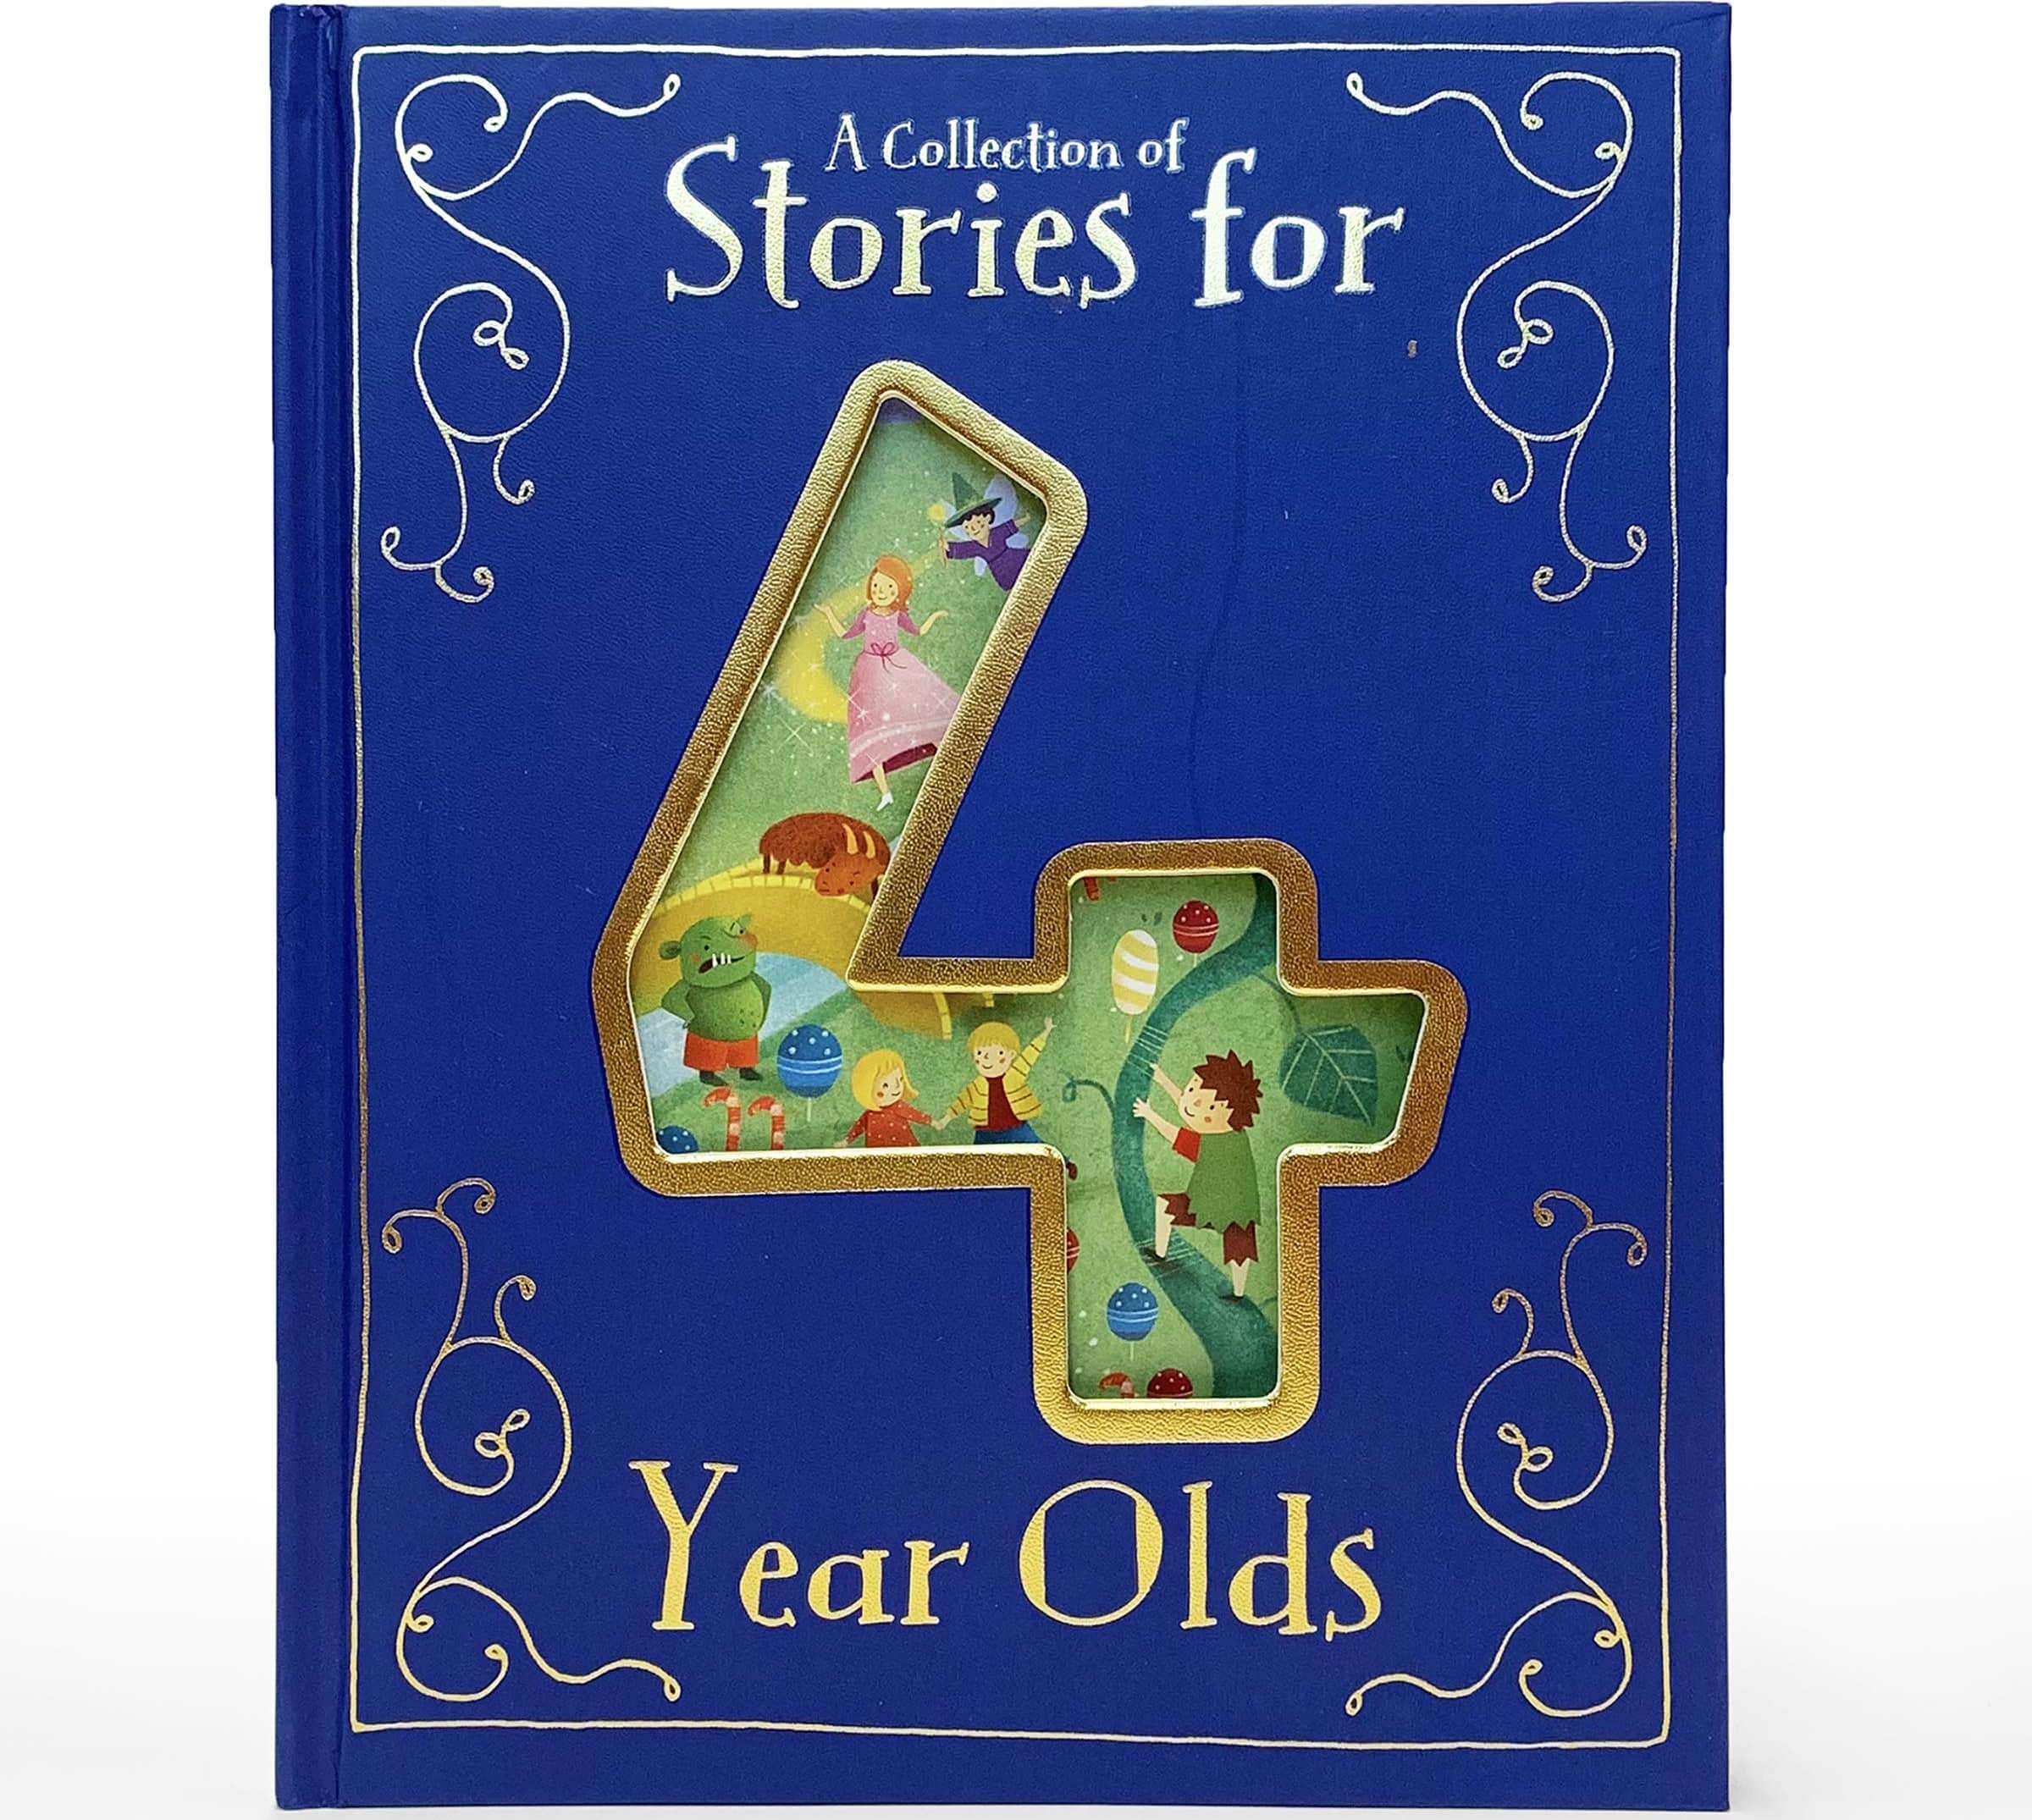 "A Collection of Stories for 4 Year Olds" Book Cover